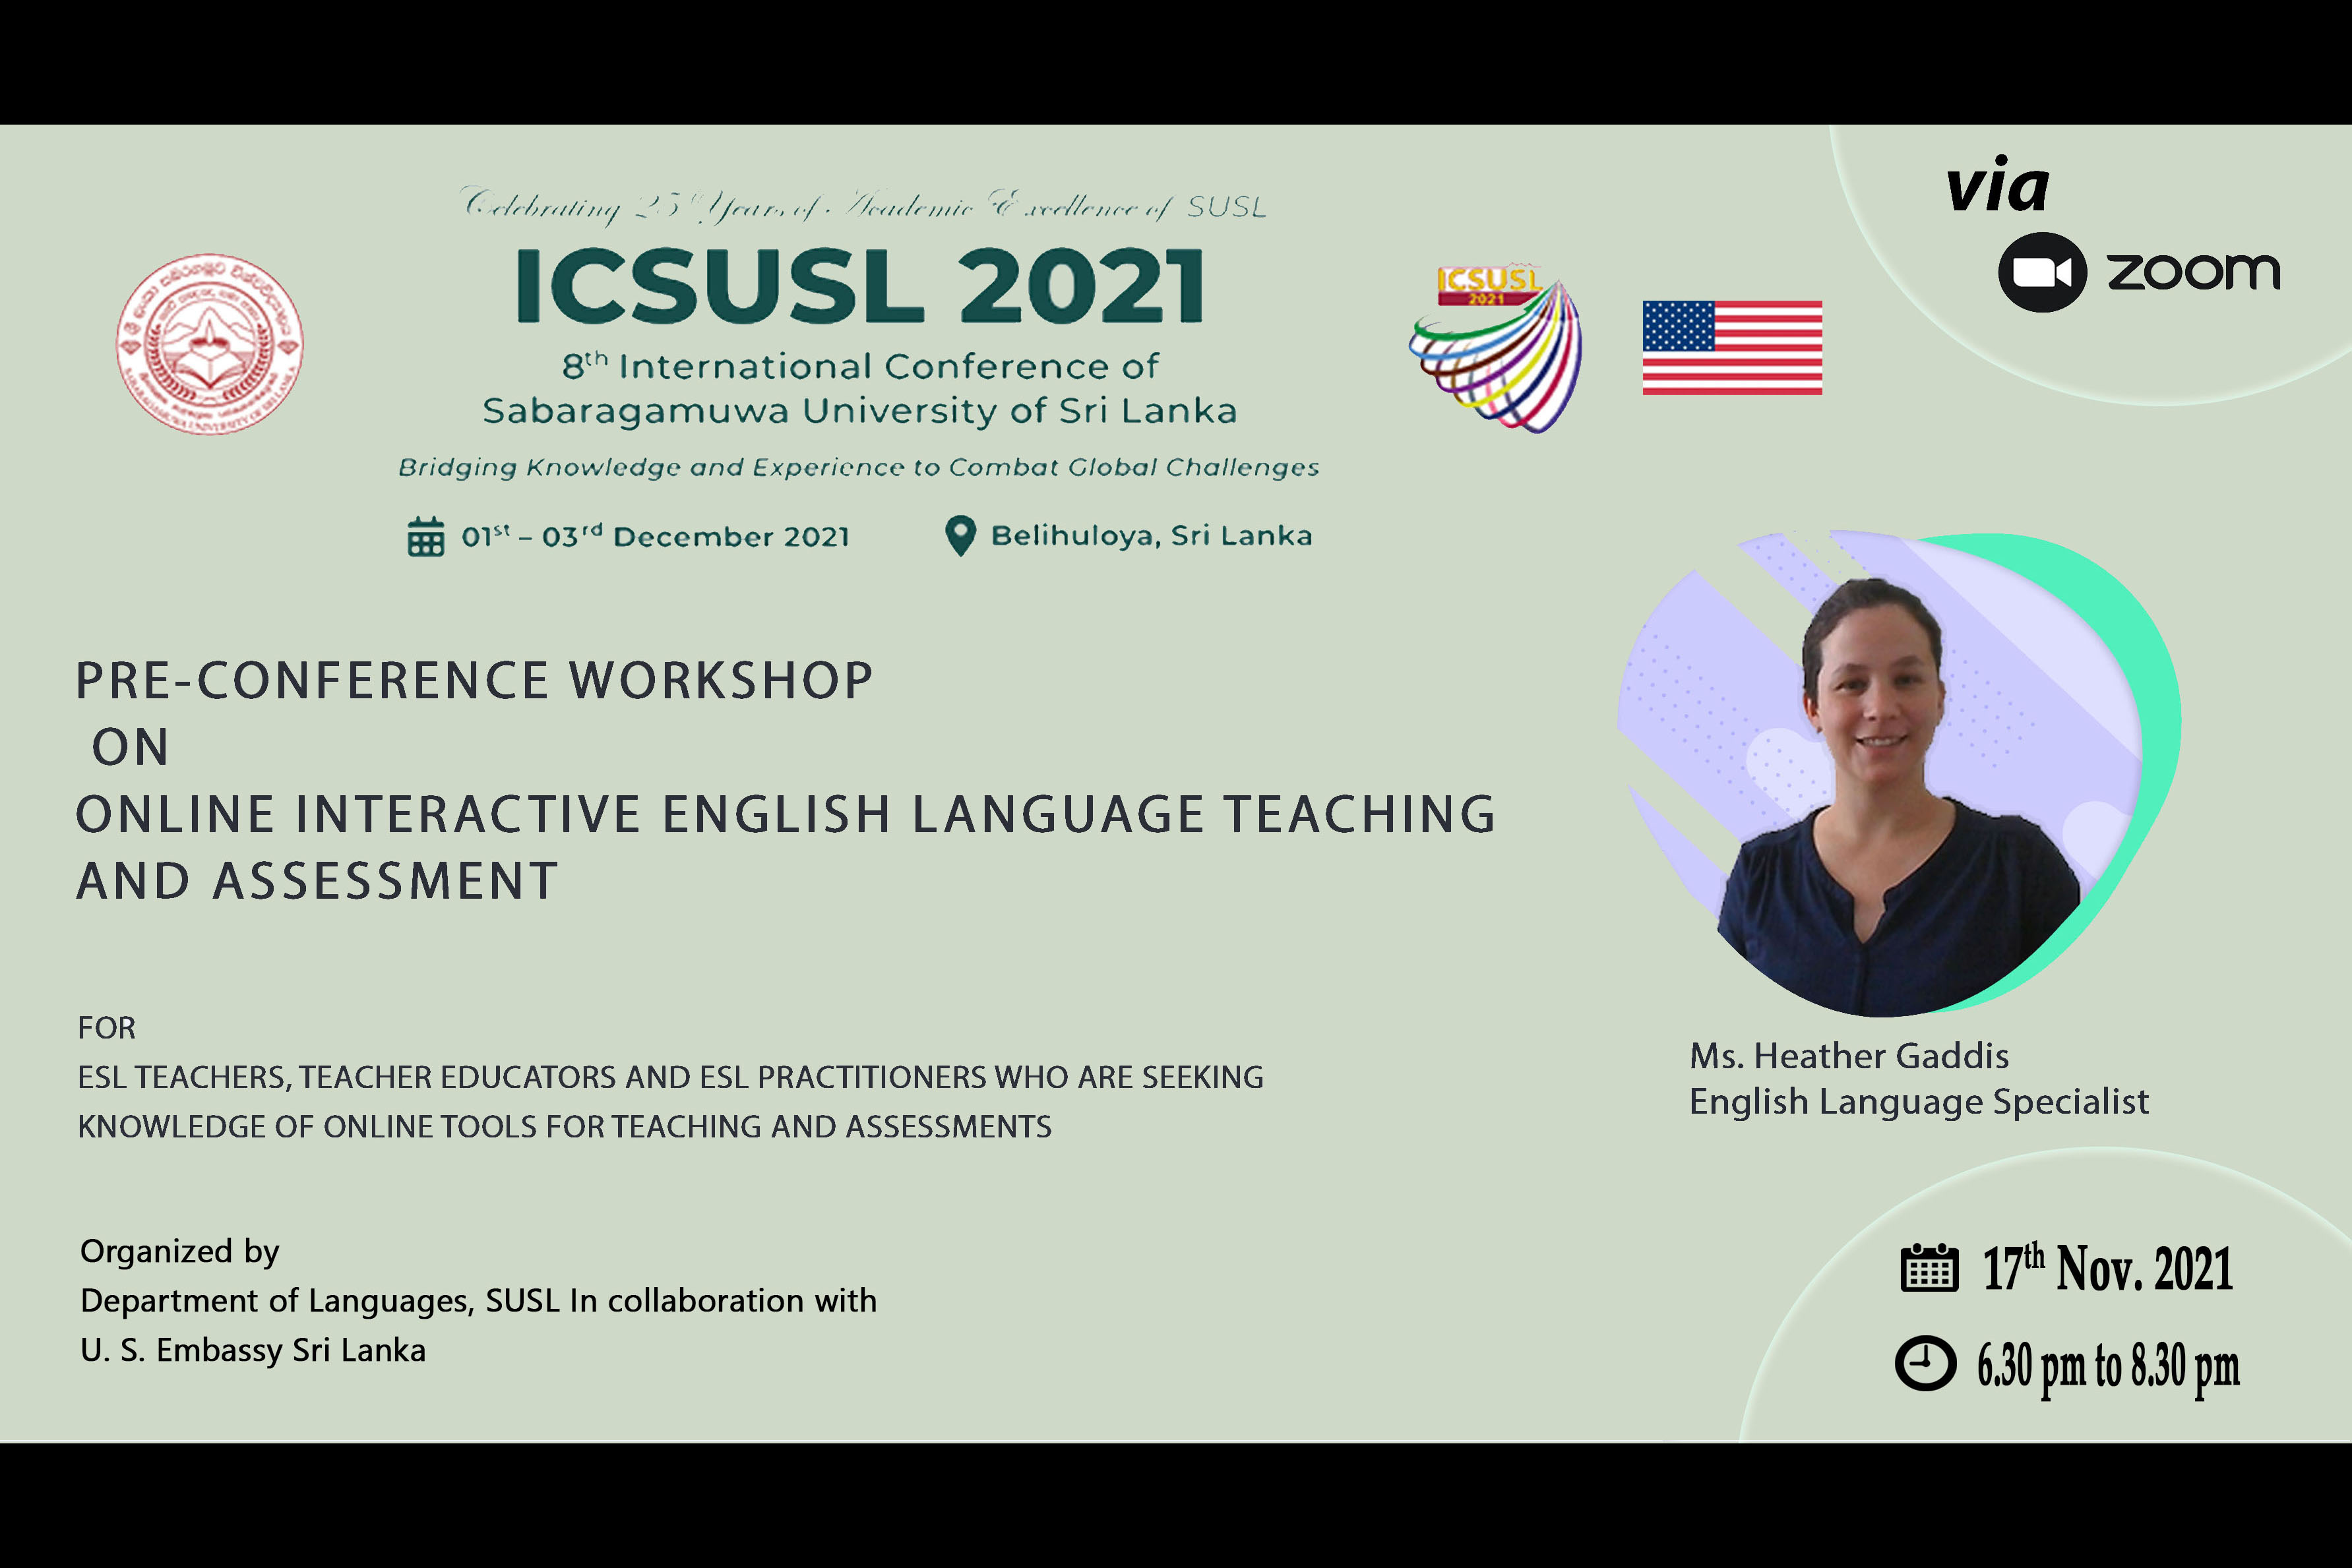 Pre-conference workshop on Online Interactive English Language Teaching and Assessment